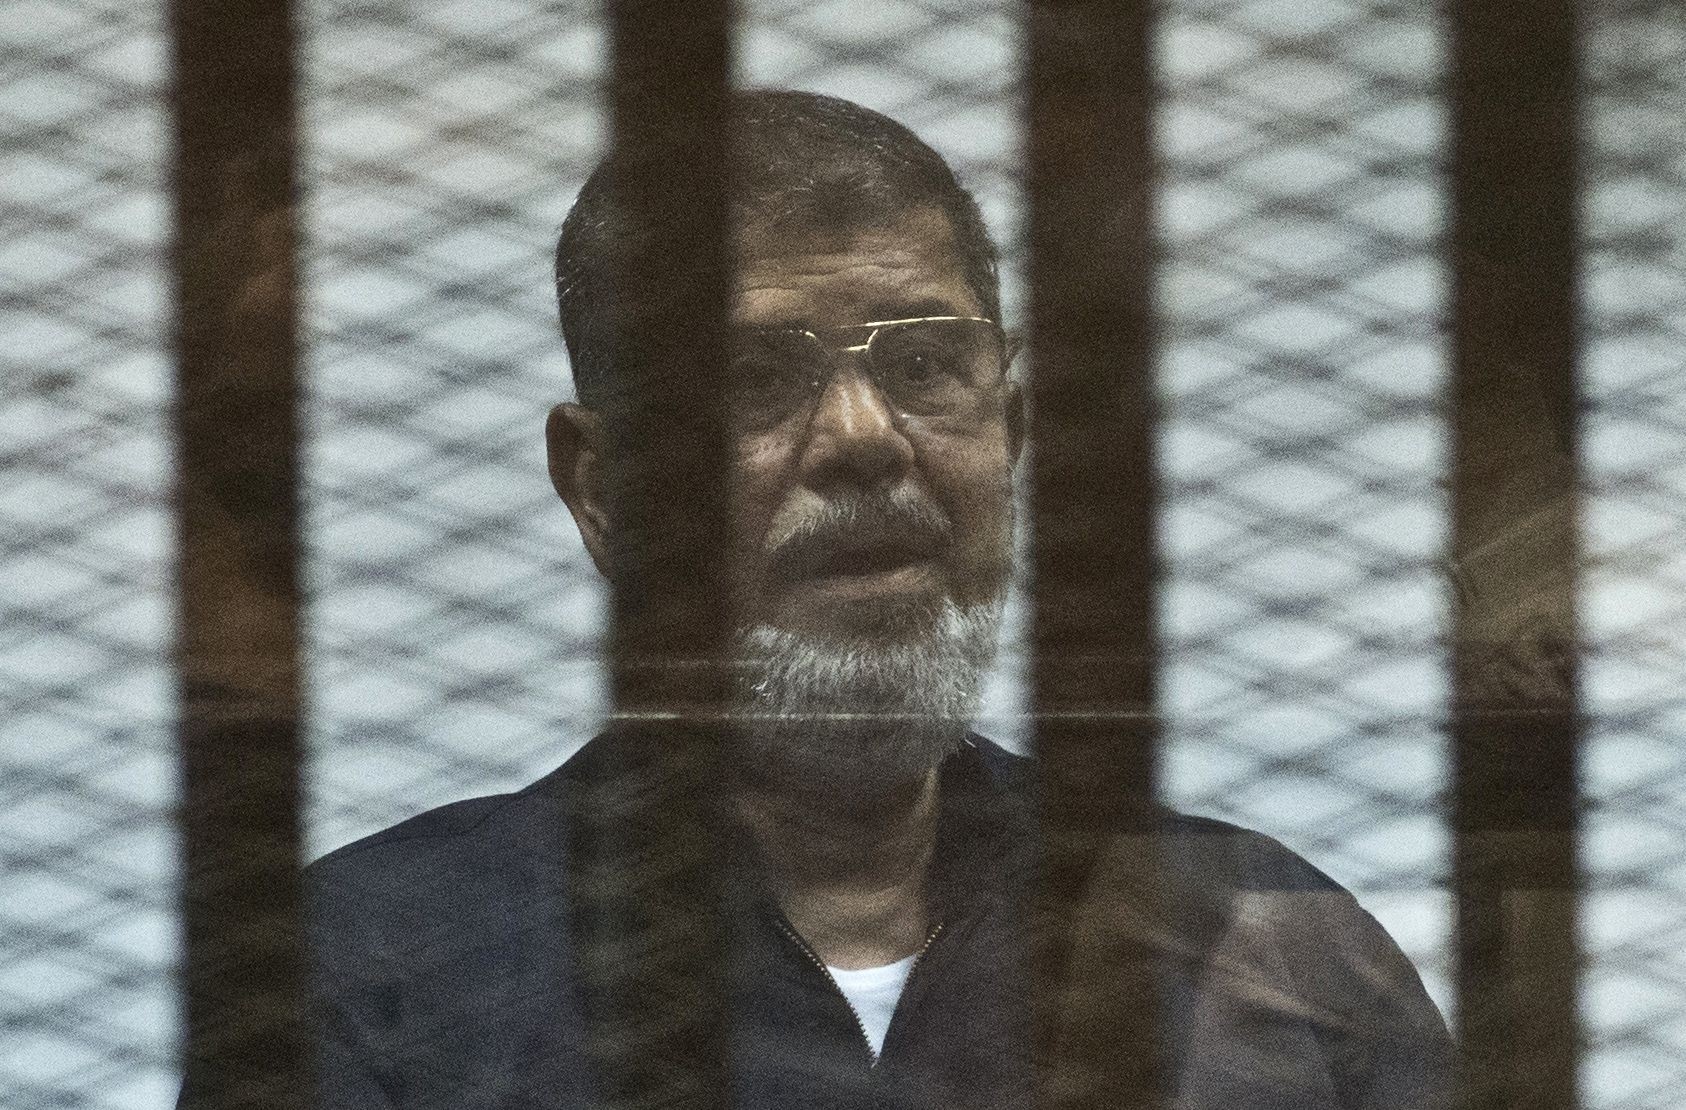 Egypt's ousted president Mohammed Mursi behind bars during a trial in 2015. File photo: AFP